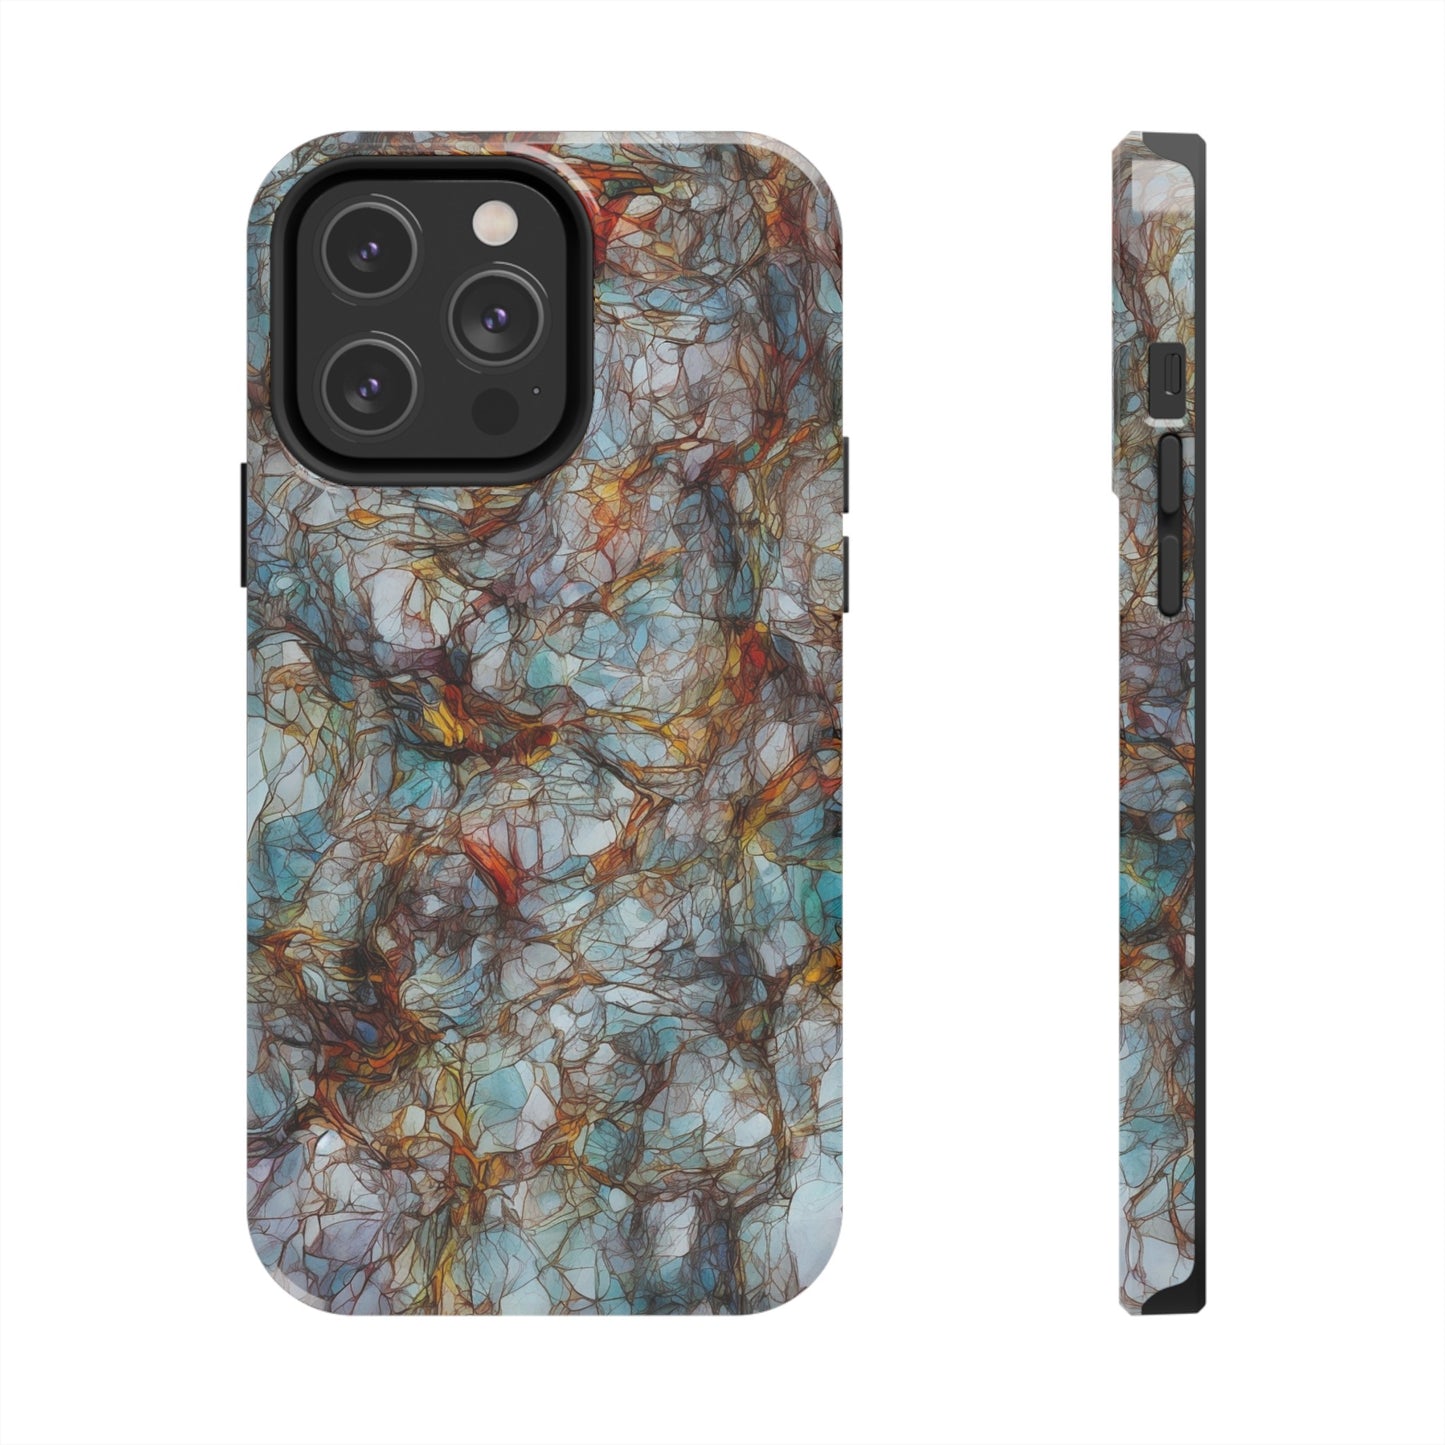 "Ethereal Connections" Tough Phone Cases